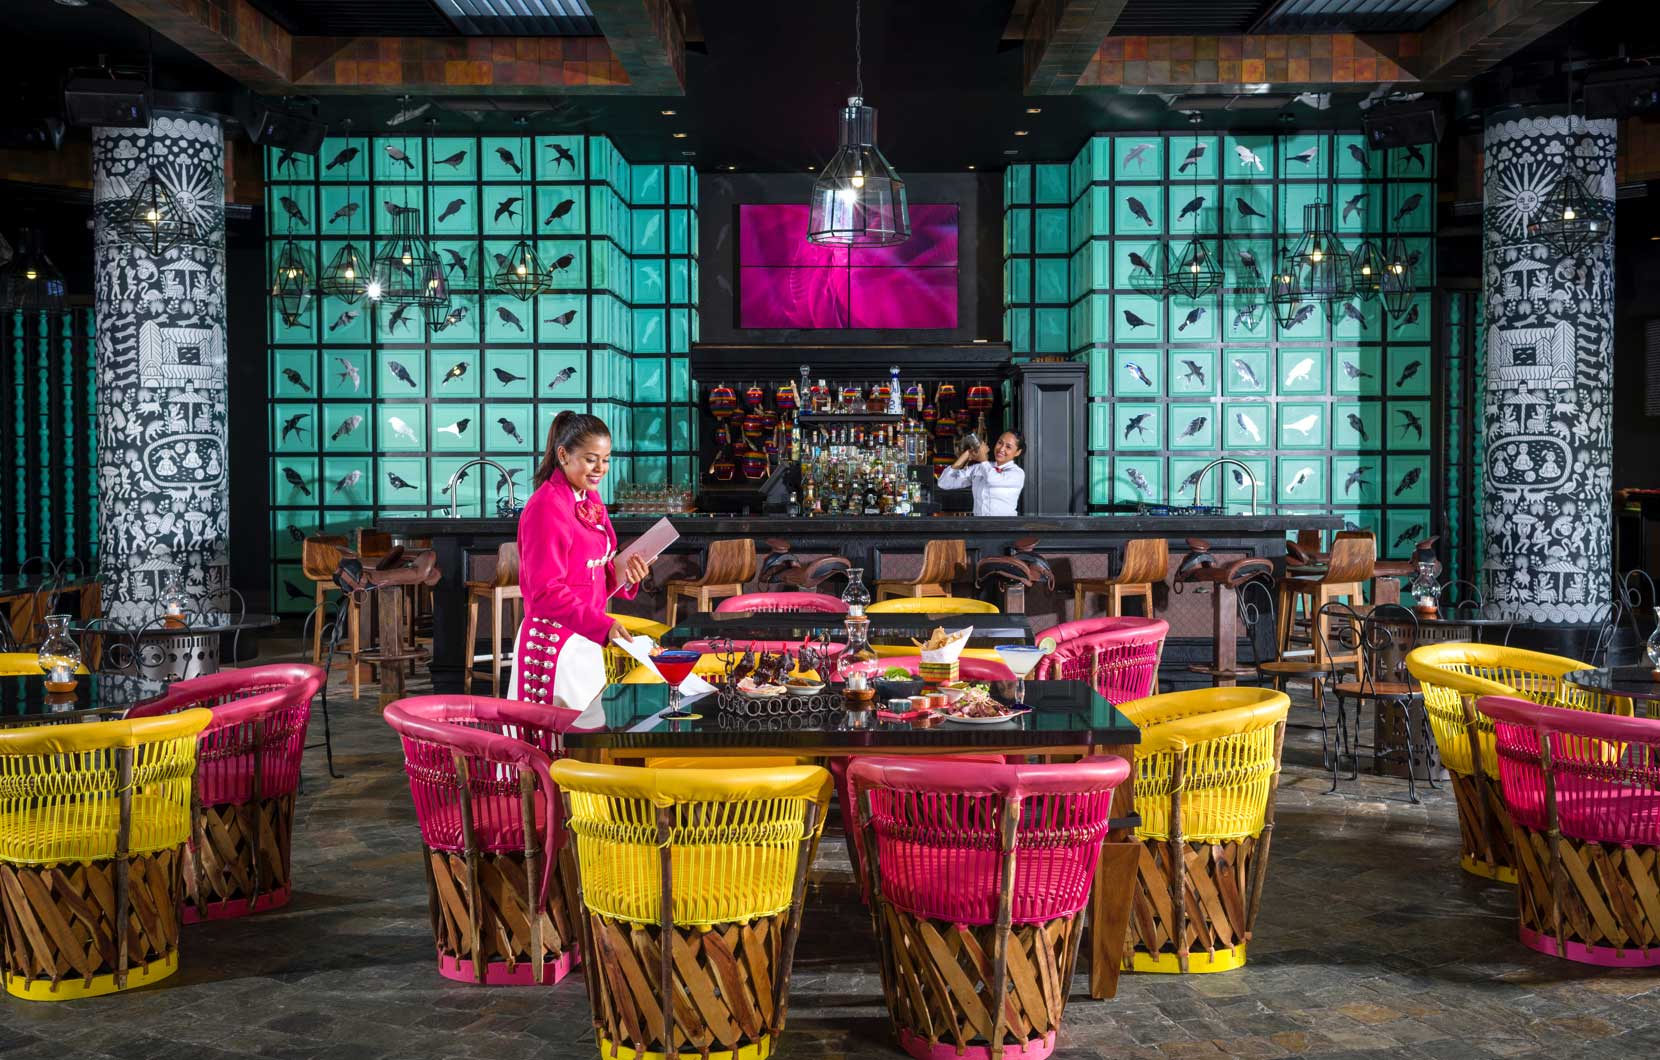 La Cantina offers a vibrant setting and amazing Mexican fare.